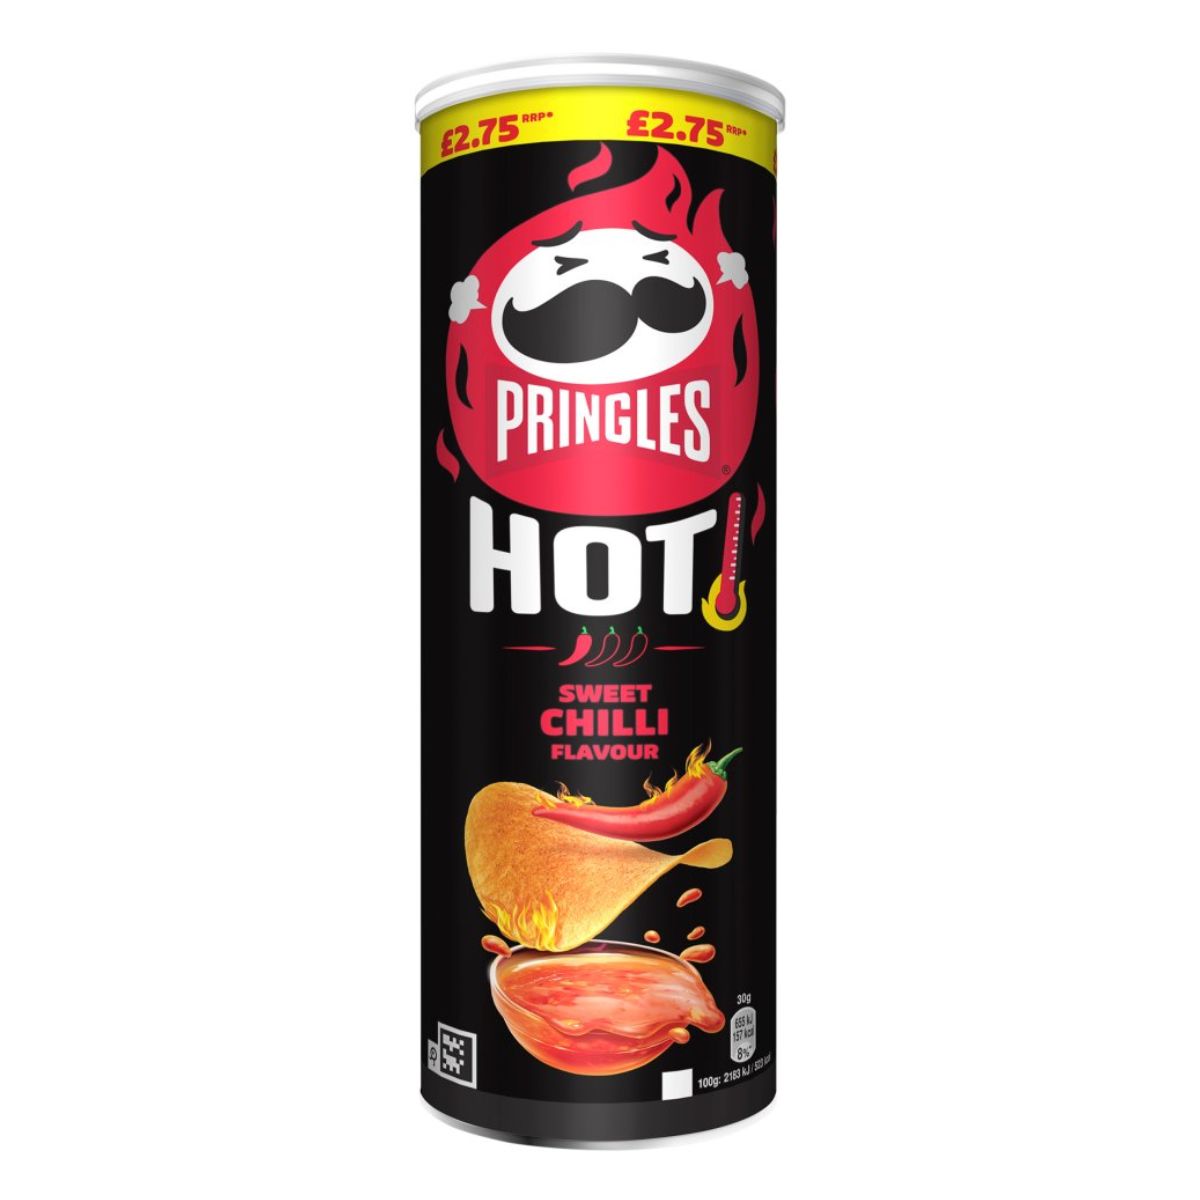 Can of Pringles - Hot Sweet Chilli Flavour - 160g with a price tag of £2.75.